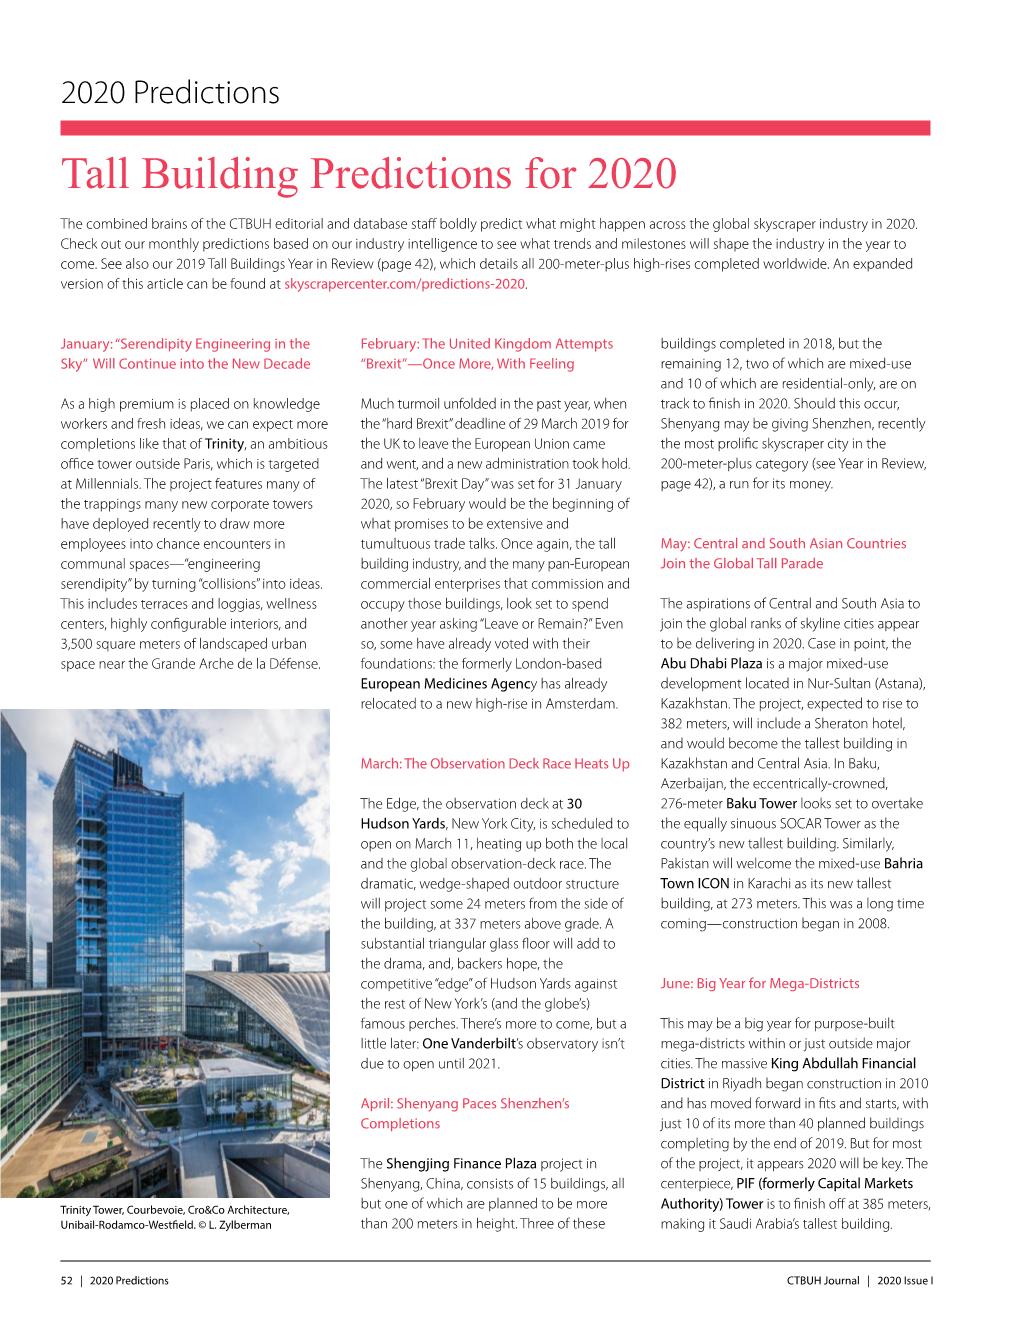 Tall Building Predictions for 2020